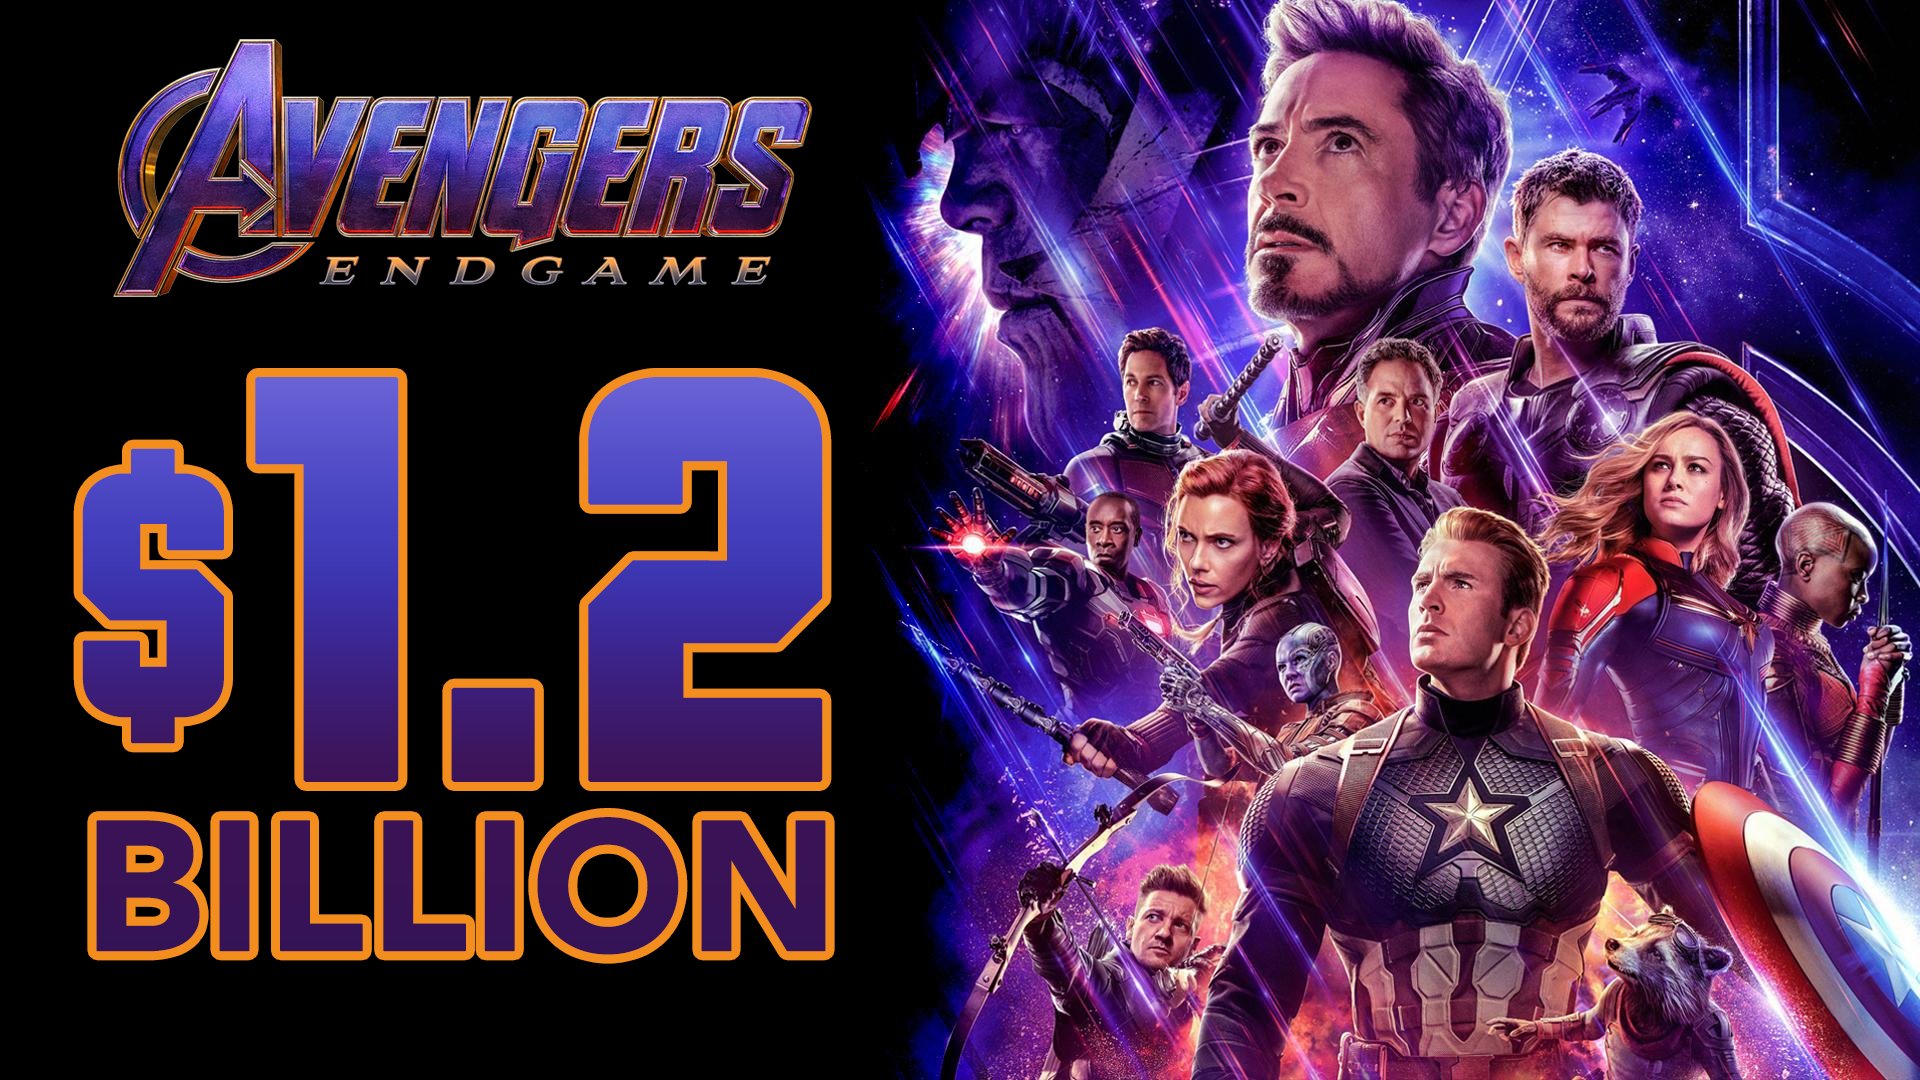 Avengers: Endgame' shatters records with $1.2 billion opening